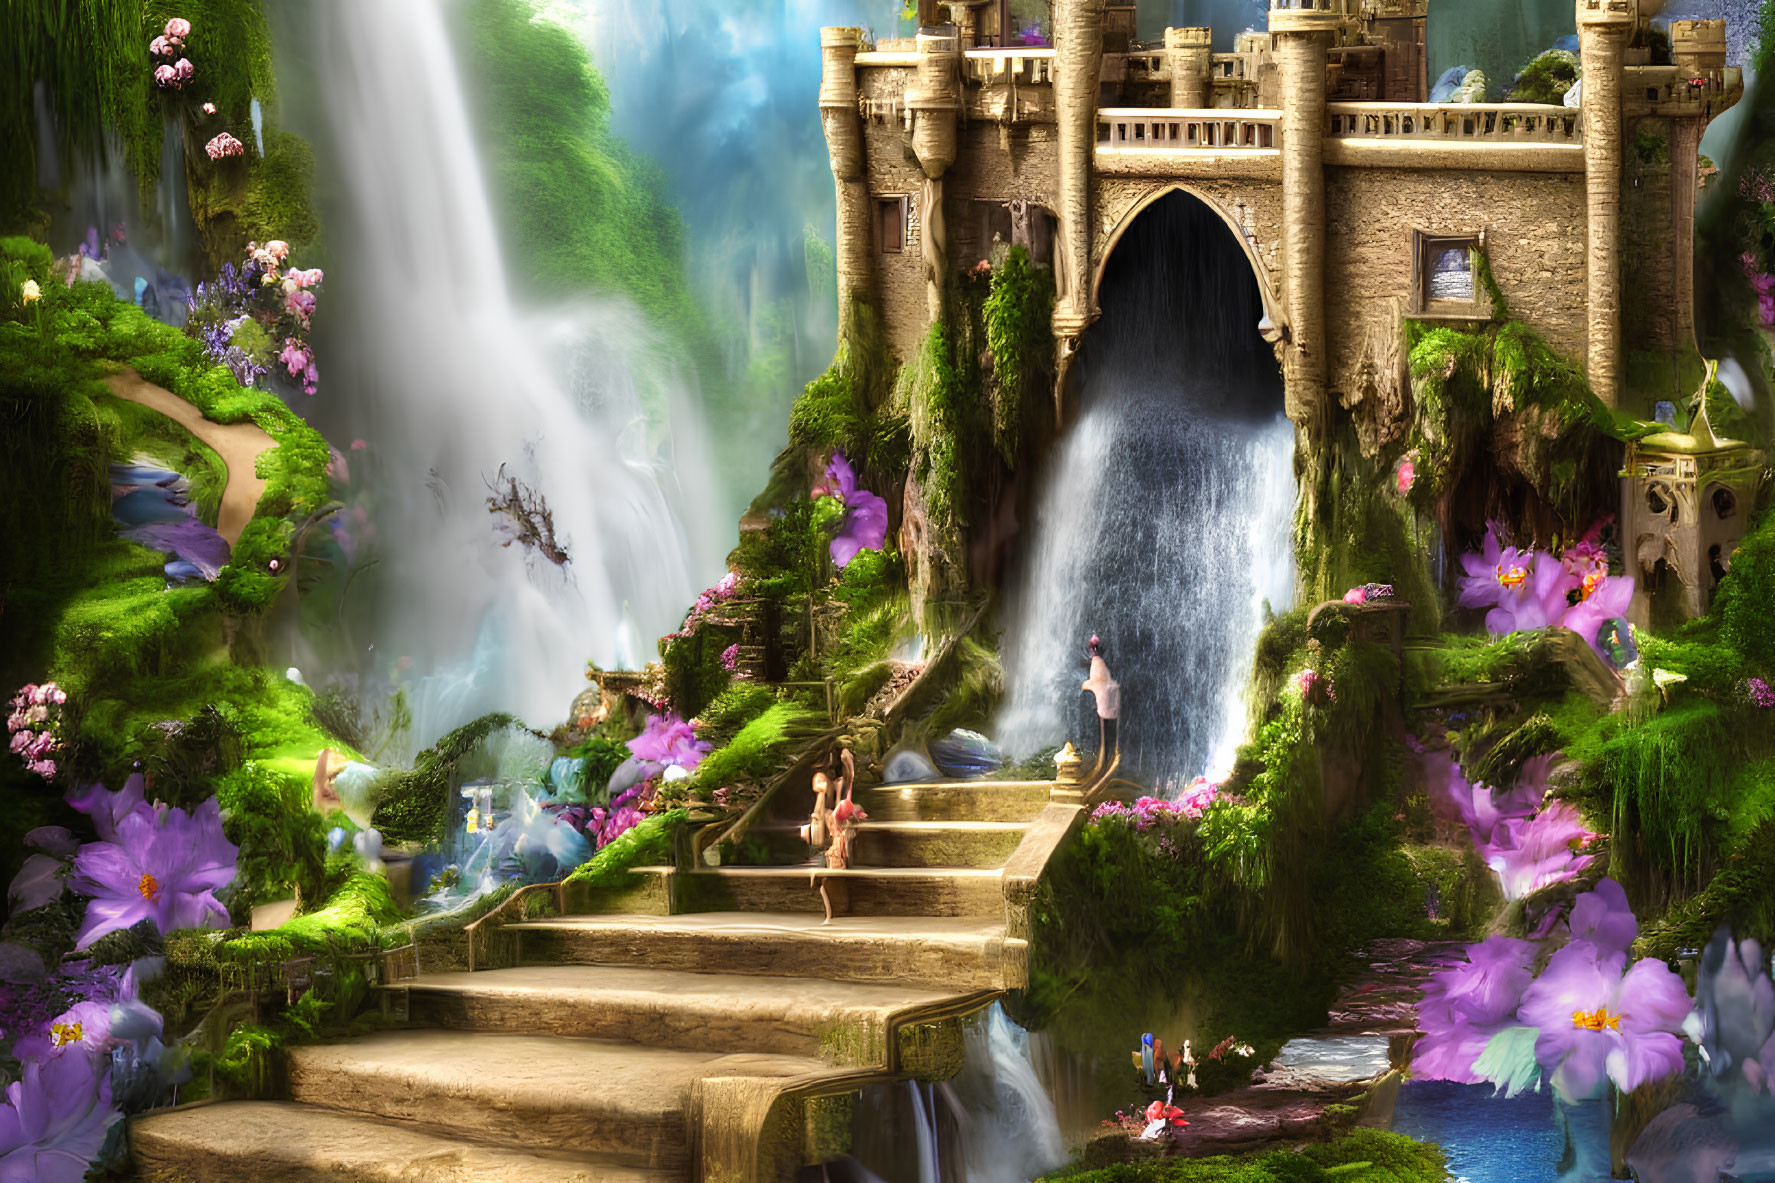 Fantastical landscape with ornate castle, waterfalls, greenery, flowers & winged creatures